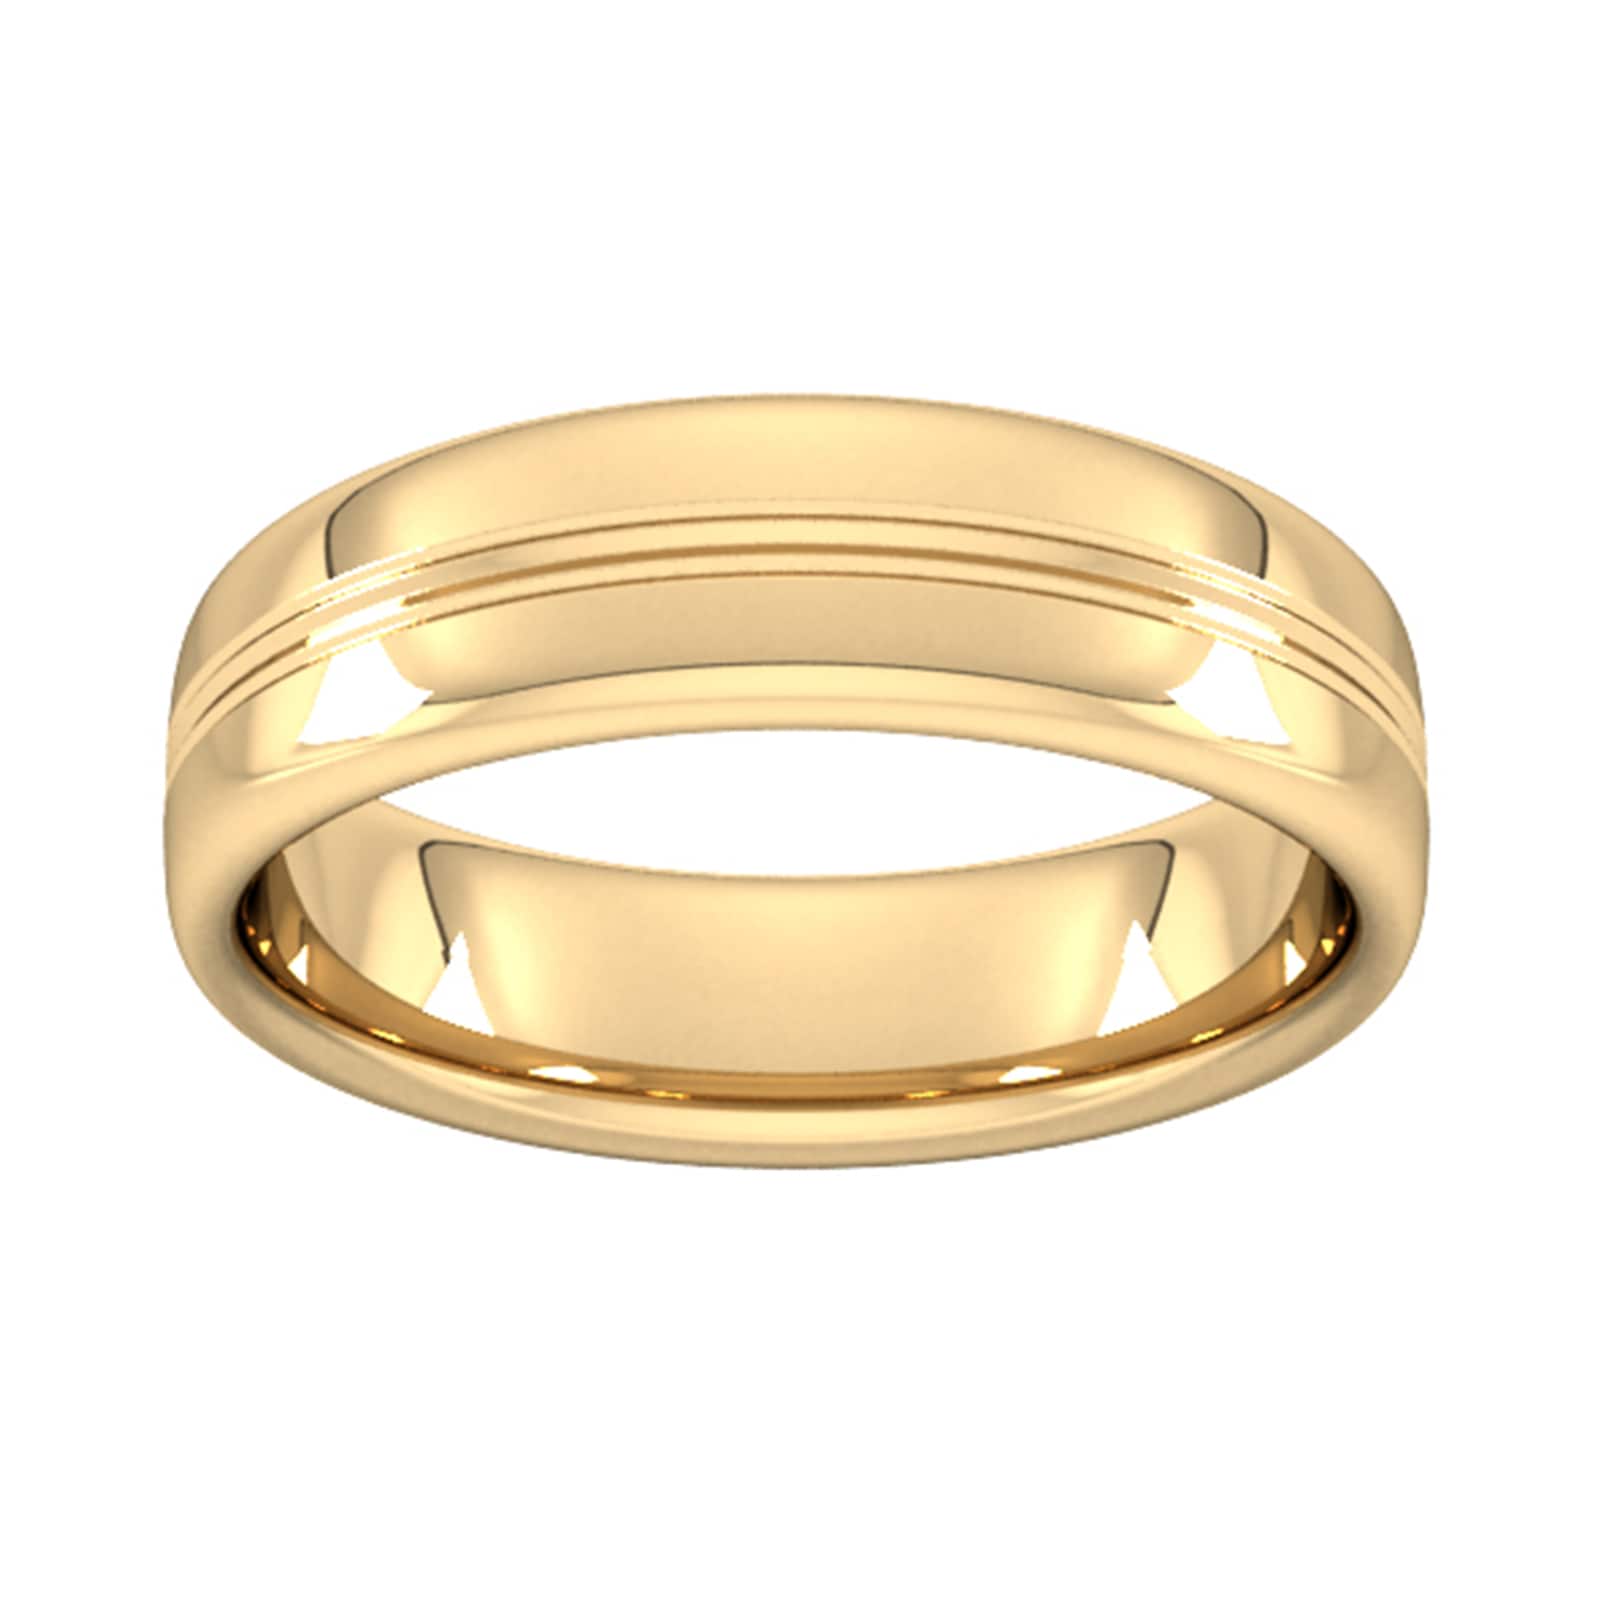 6mm Slight Court Heavy Grooved Polished Finish Wedding Ring In 18 Carat Yellow Gold - Ring Size M